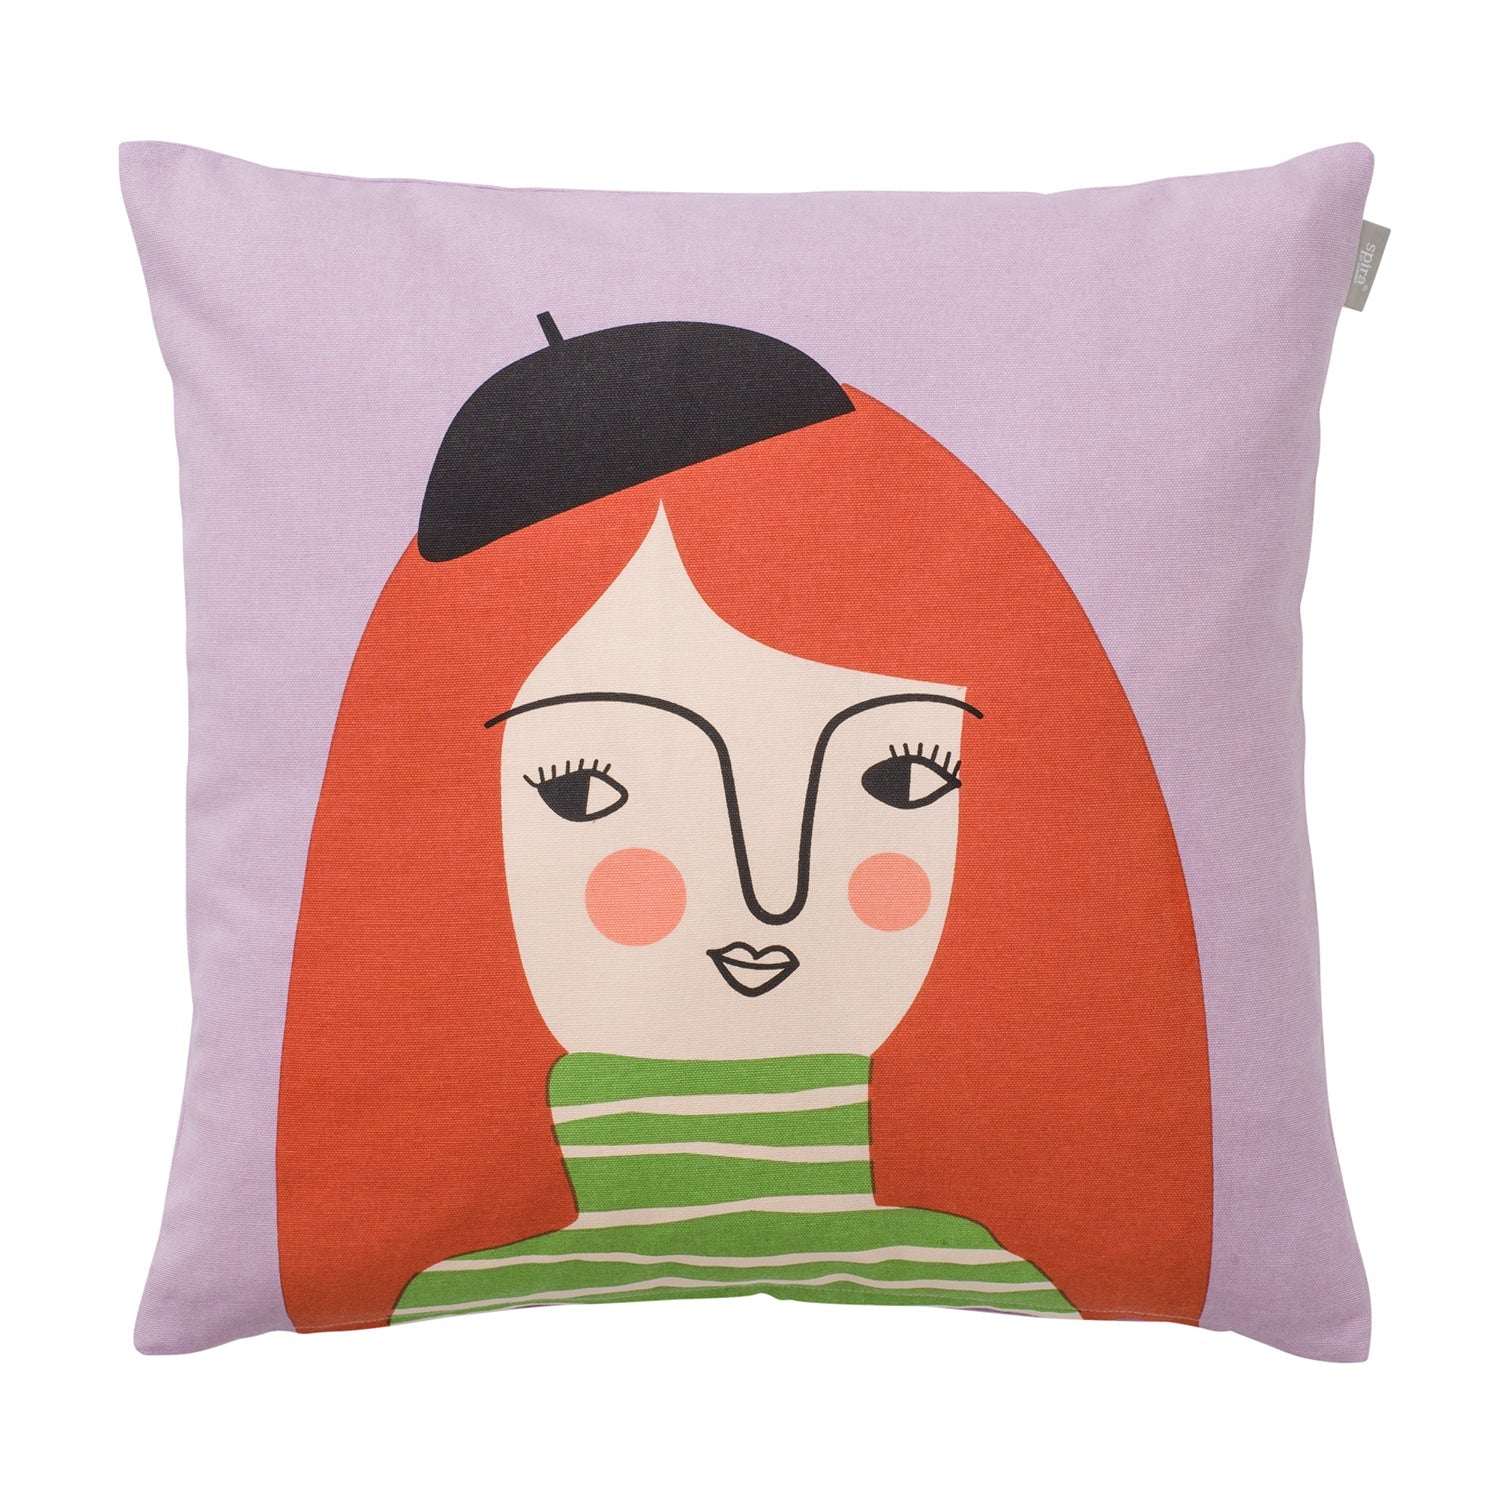 Spirra Buddy Pillow Cover, Astrid